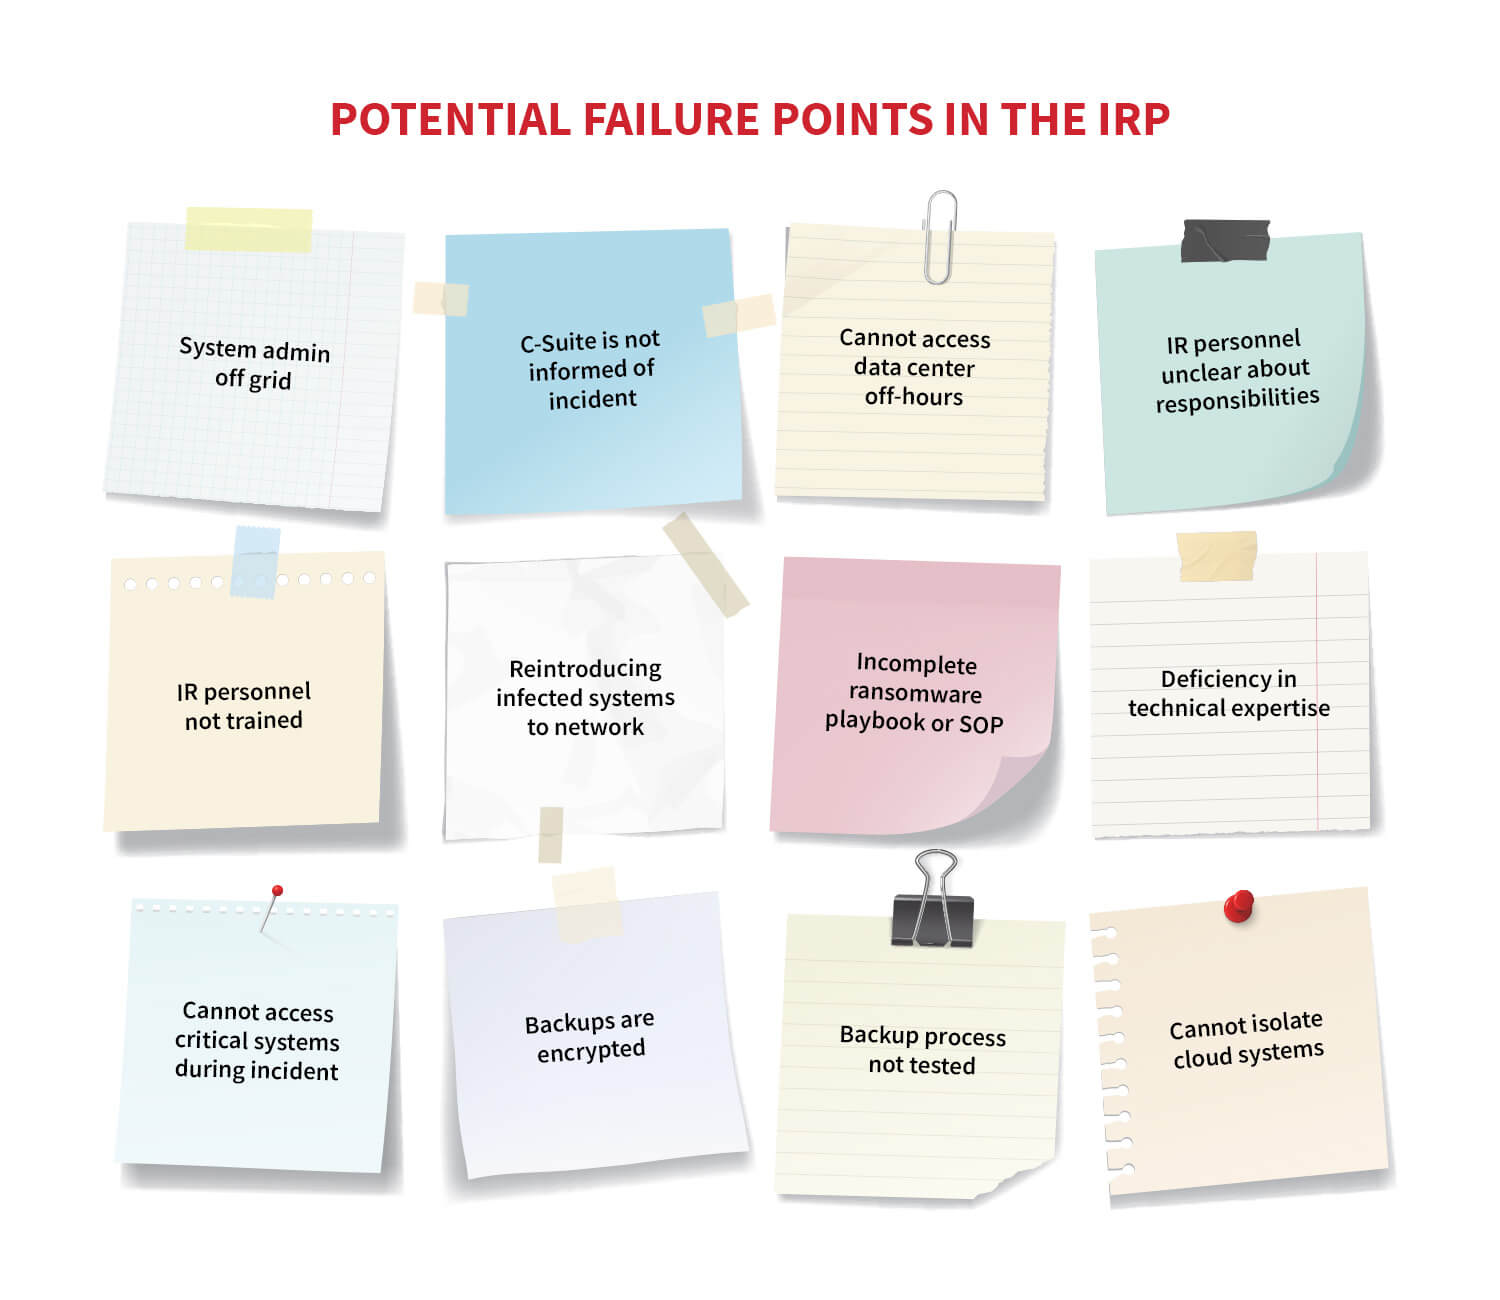 Examples of potential failure points of the IRP